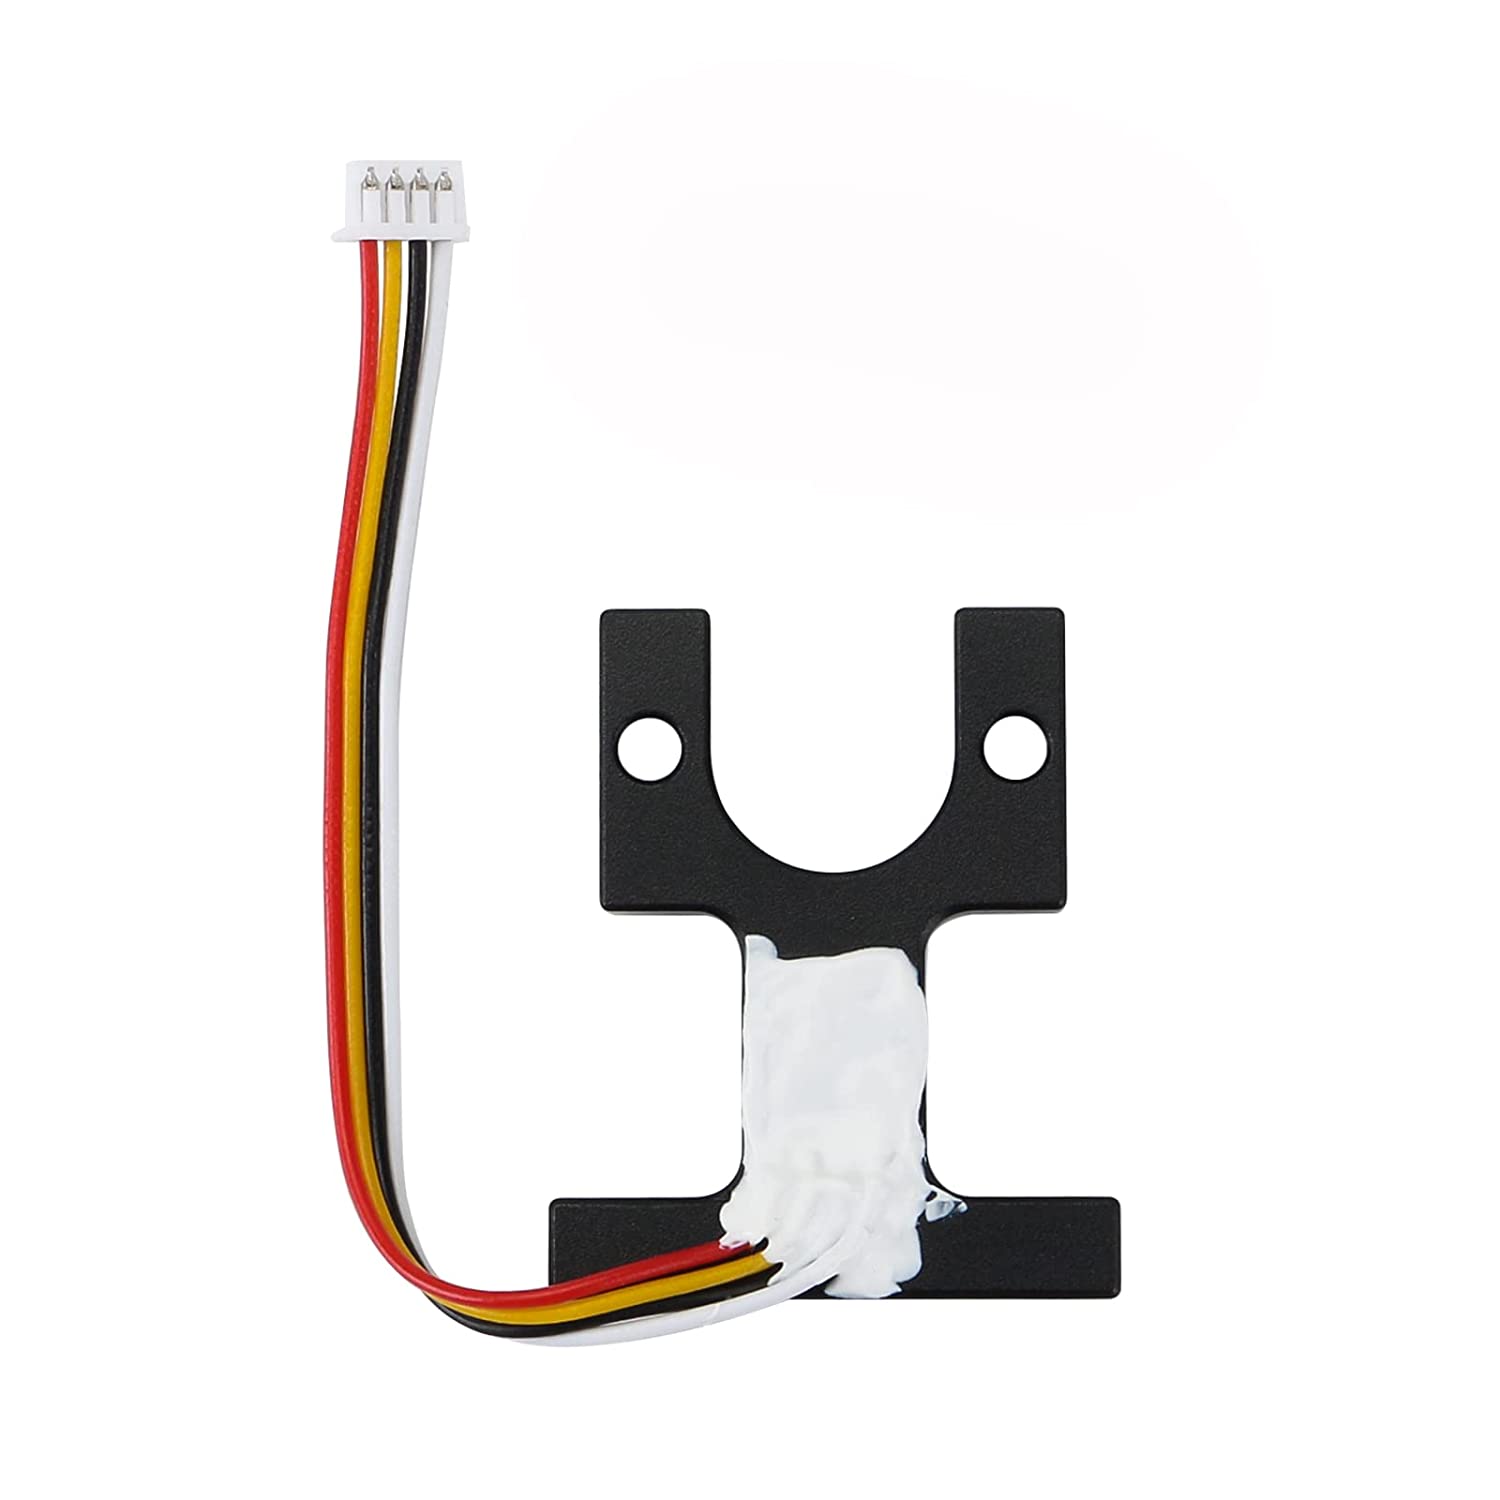 ANYCUBIC Vyper Auto Bed Levelling Strain Gauge Sensor + Mounting Block